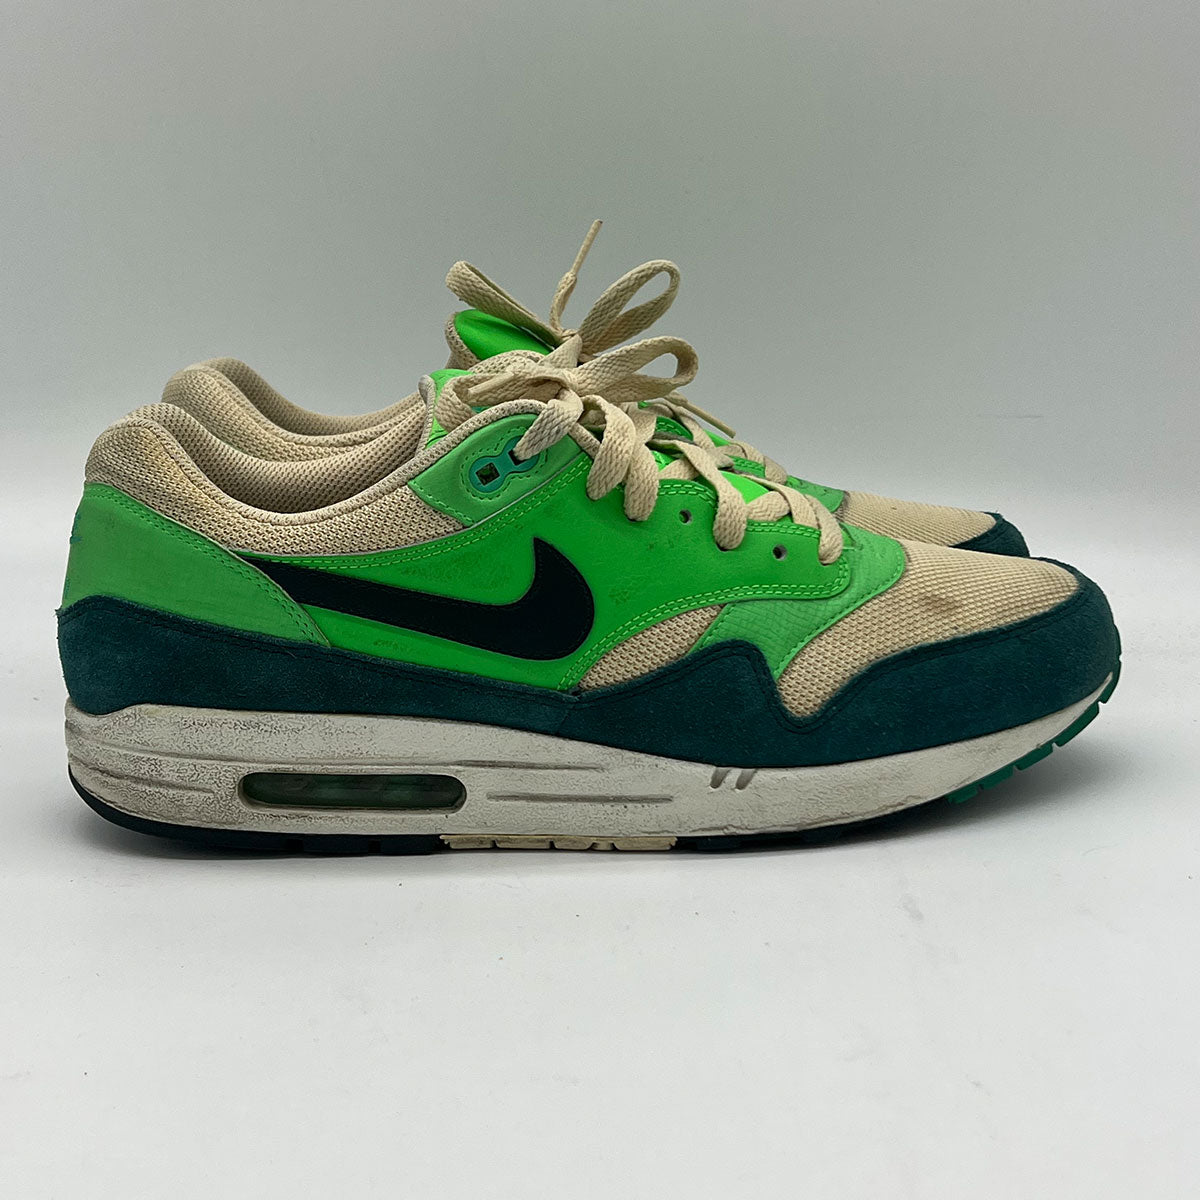 Nike Air Max 1 Birch Atomic Teal (Pre-Owned) size 11 - KickzStore